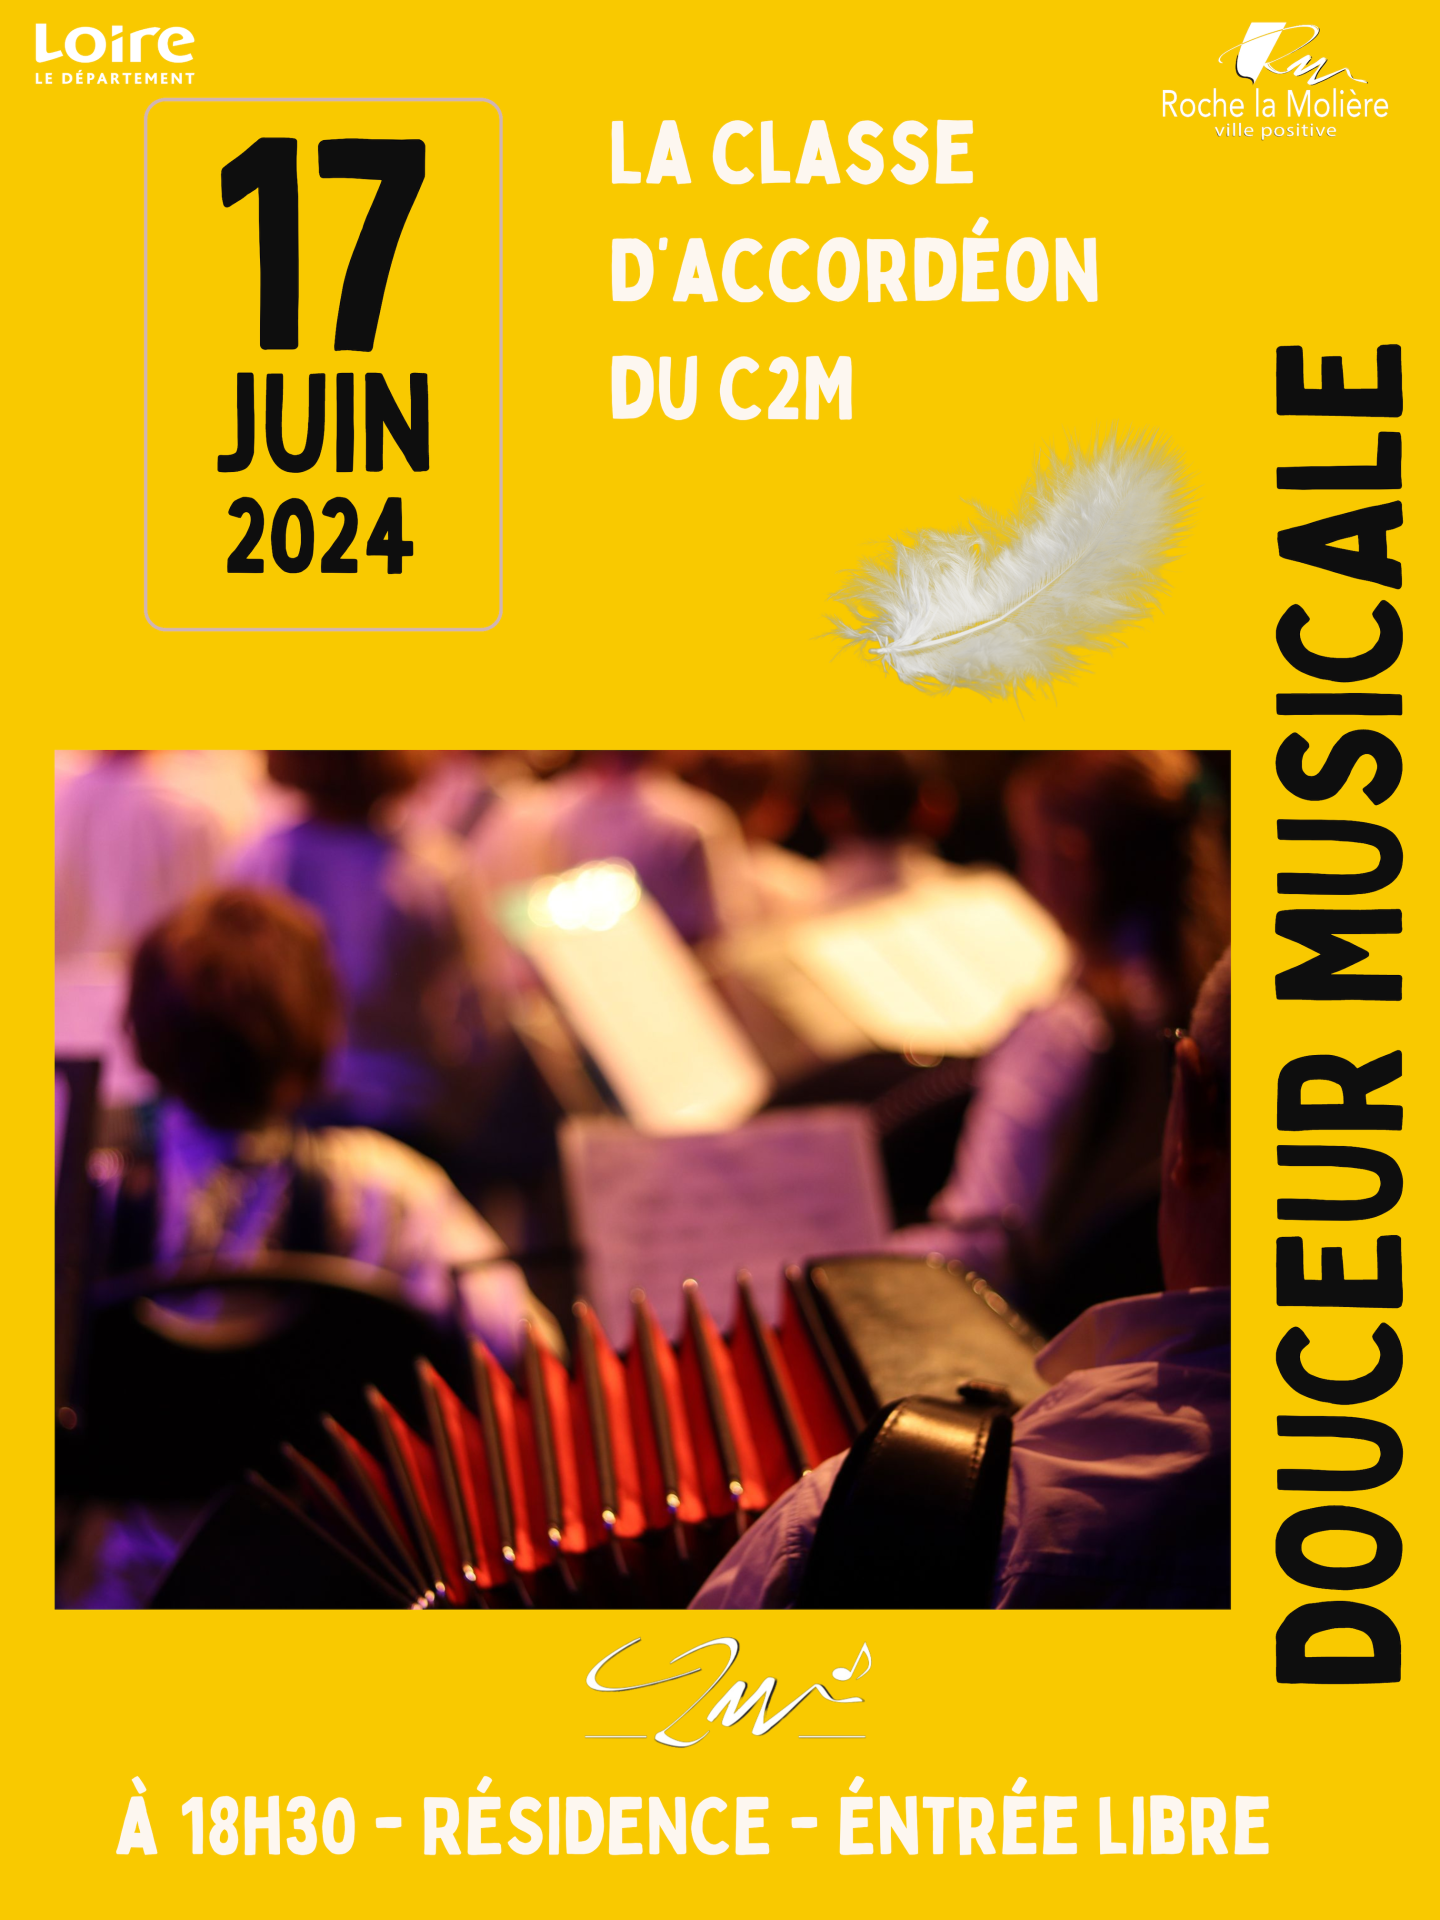 Douceur musicale accorde on 17 juin 2024